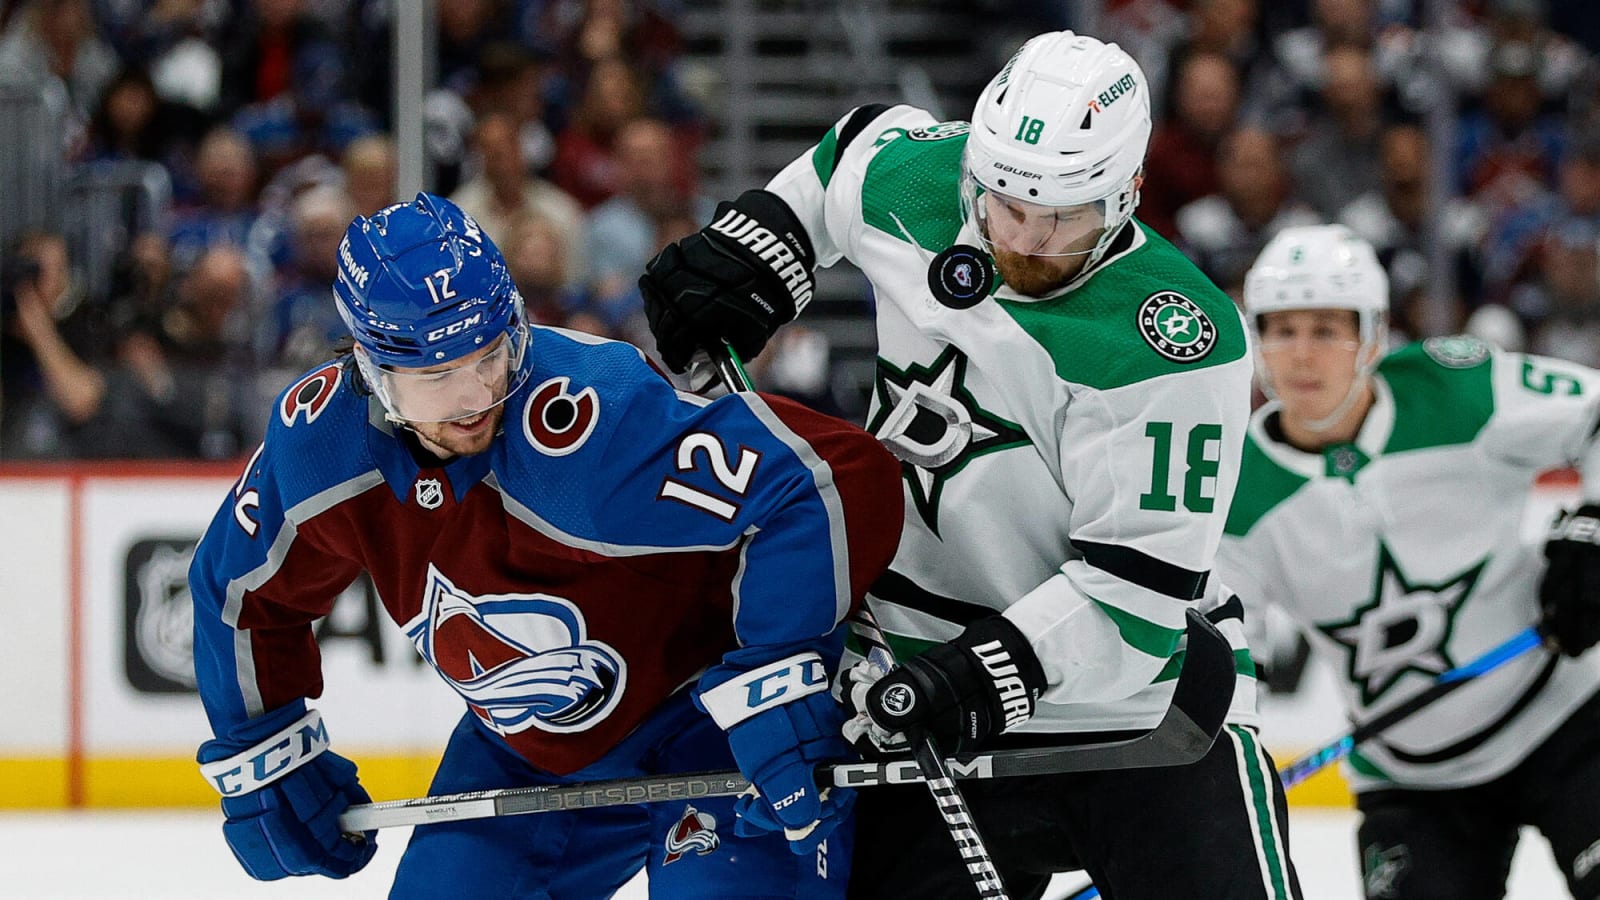 Rapid Reaction: Shocked Or Not, Unacceptable Performance By Avalanche